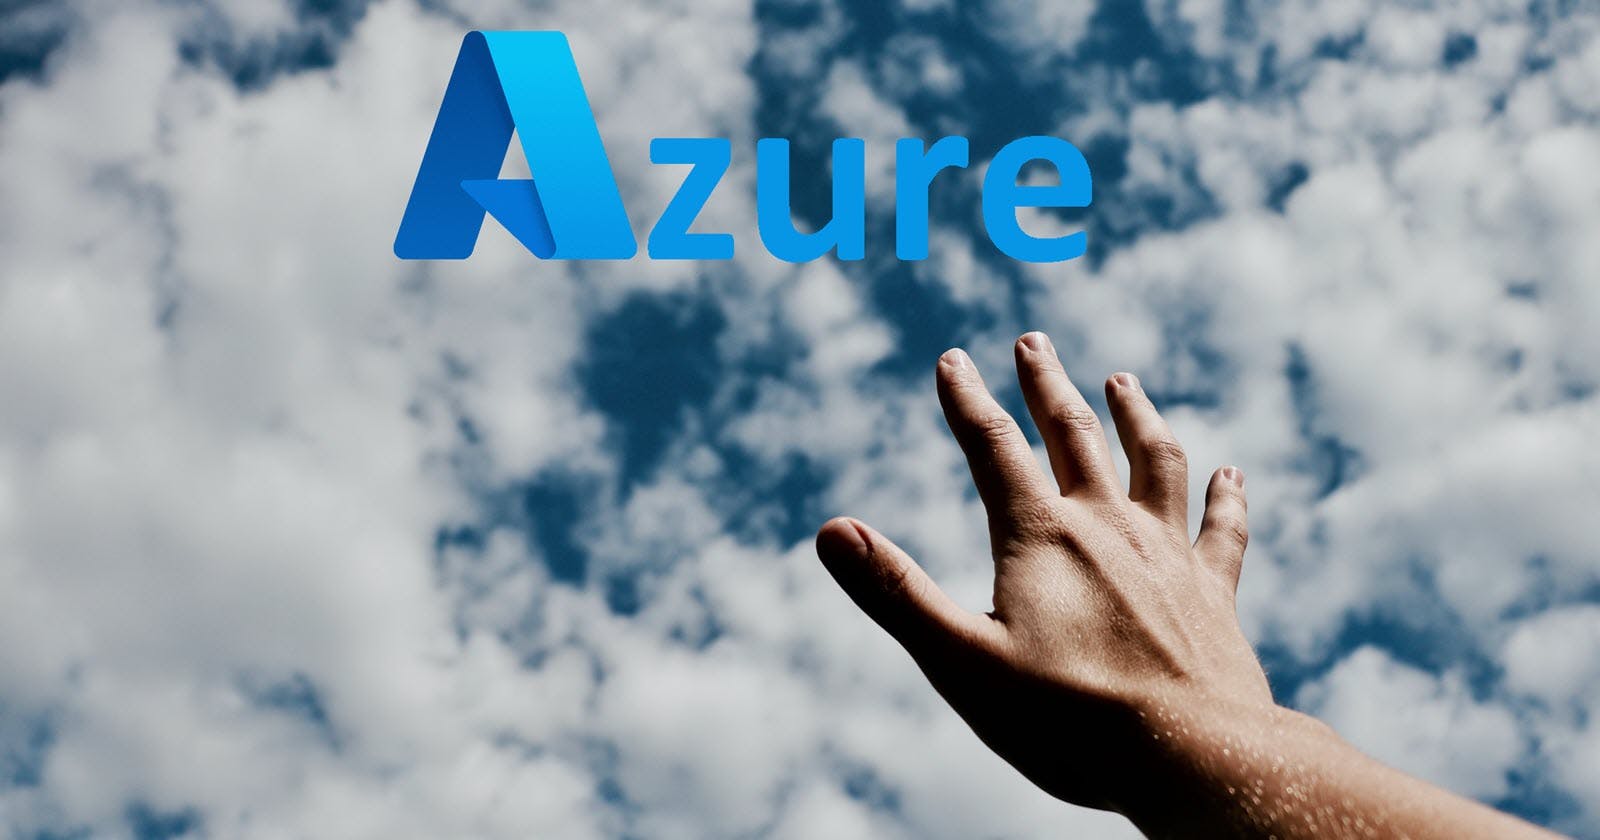 About Tenants, Subscriptions, Regions and Geographies in Azure